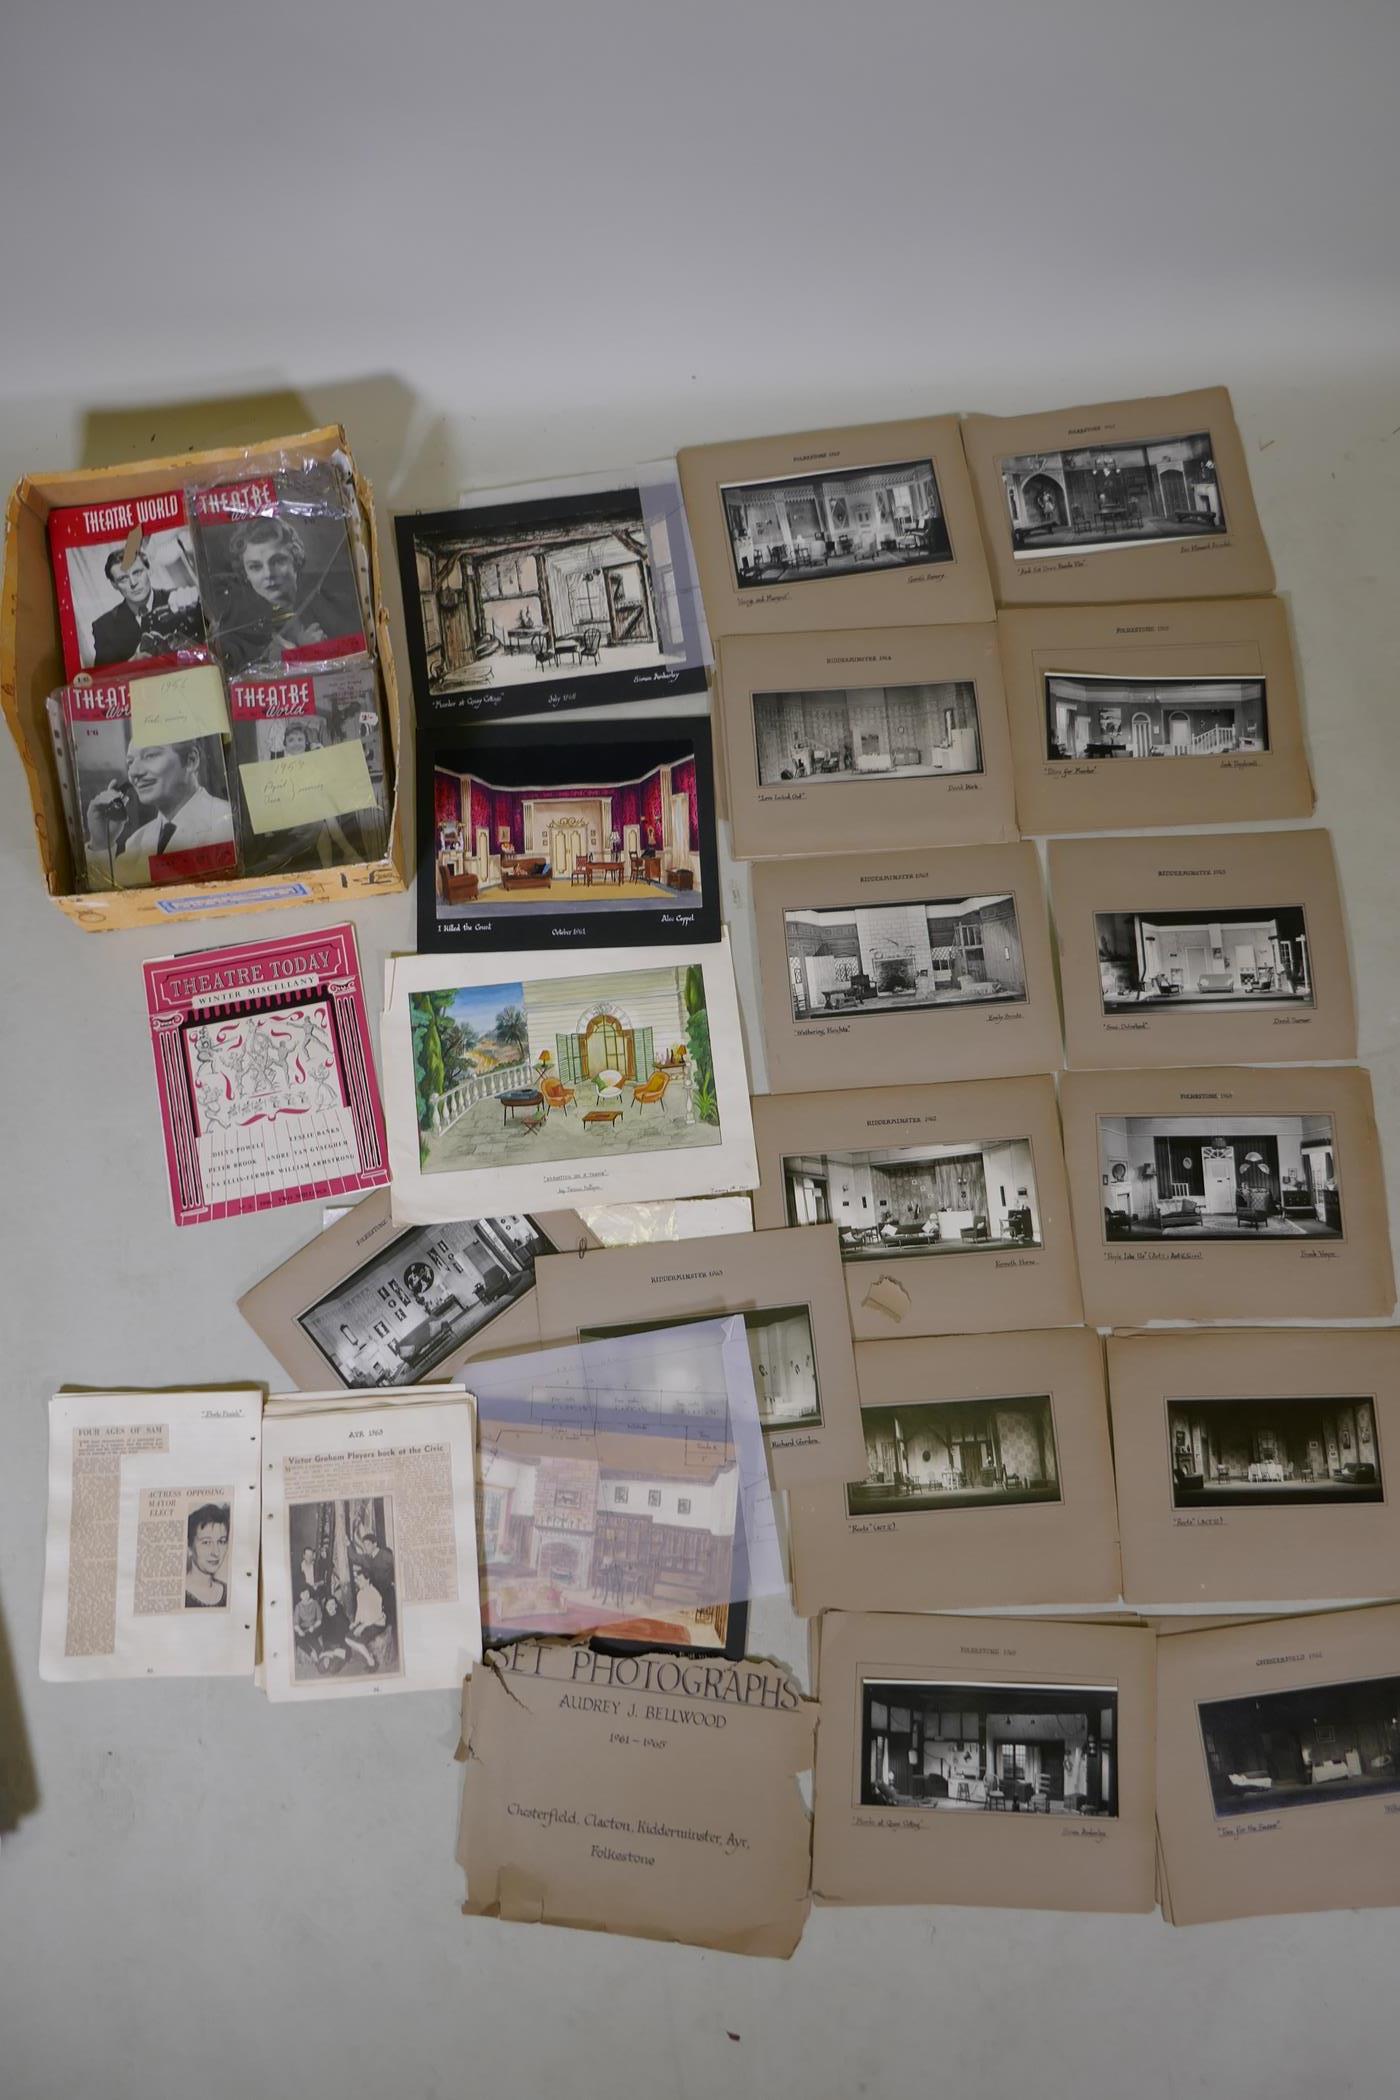 A large collection of theatre ephemera, including programs, set designs, press cuttings, Theatre